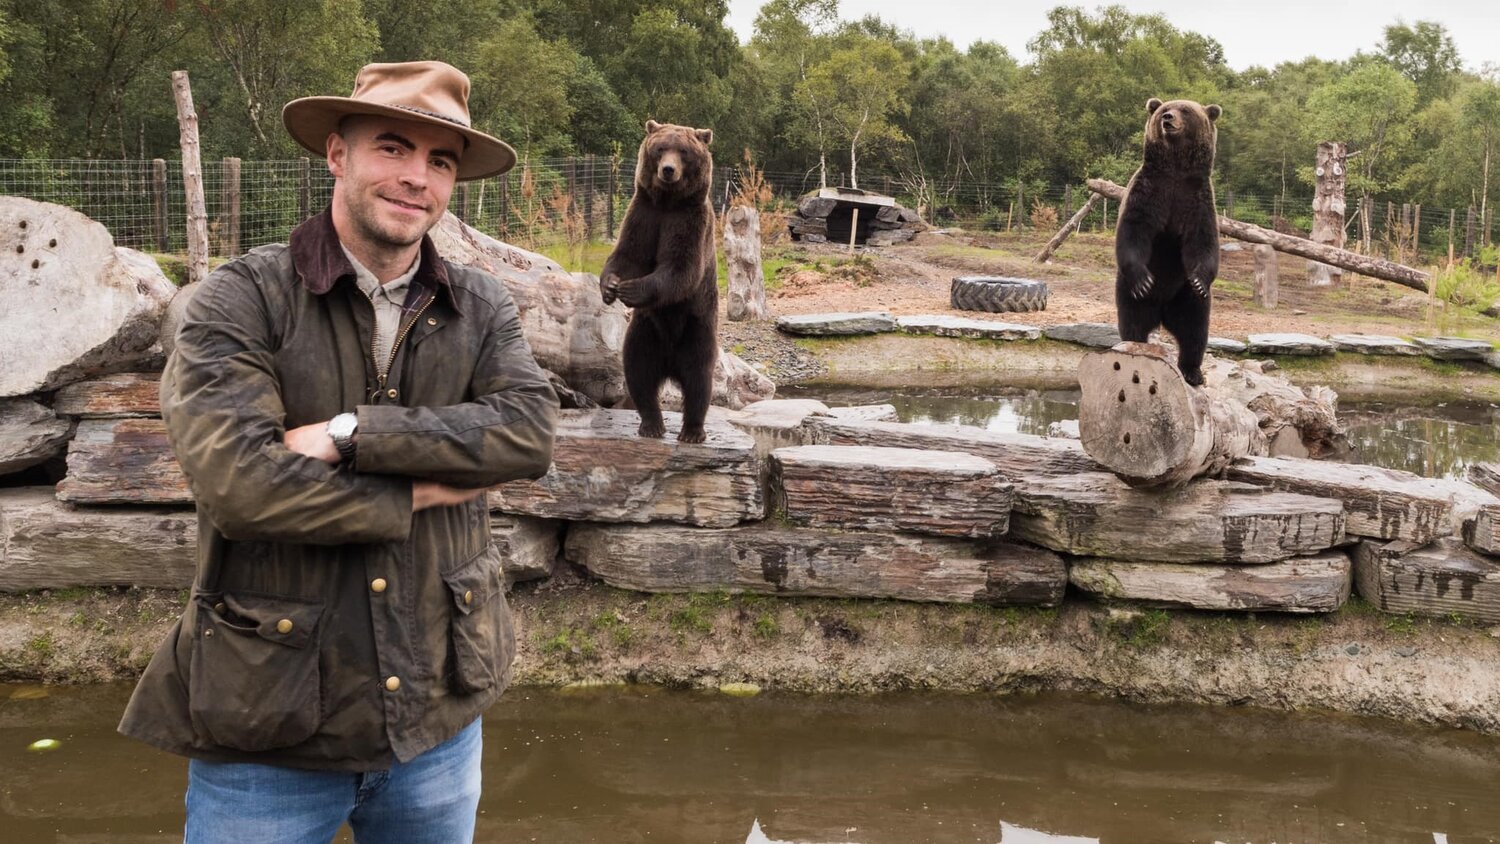 Killian McLaughlin with two bears, rescued from Lithuania, who already live at the Wild Ireland sanctuary